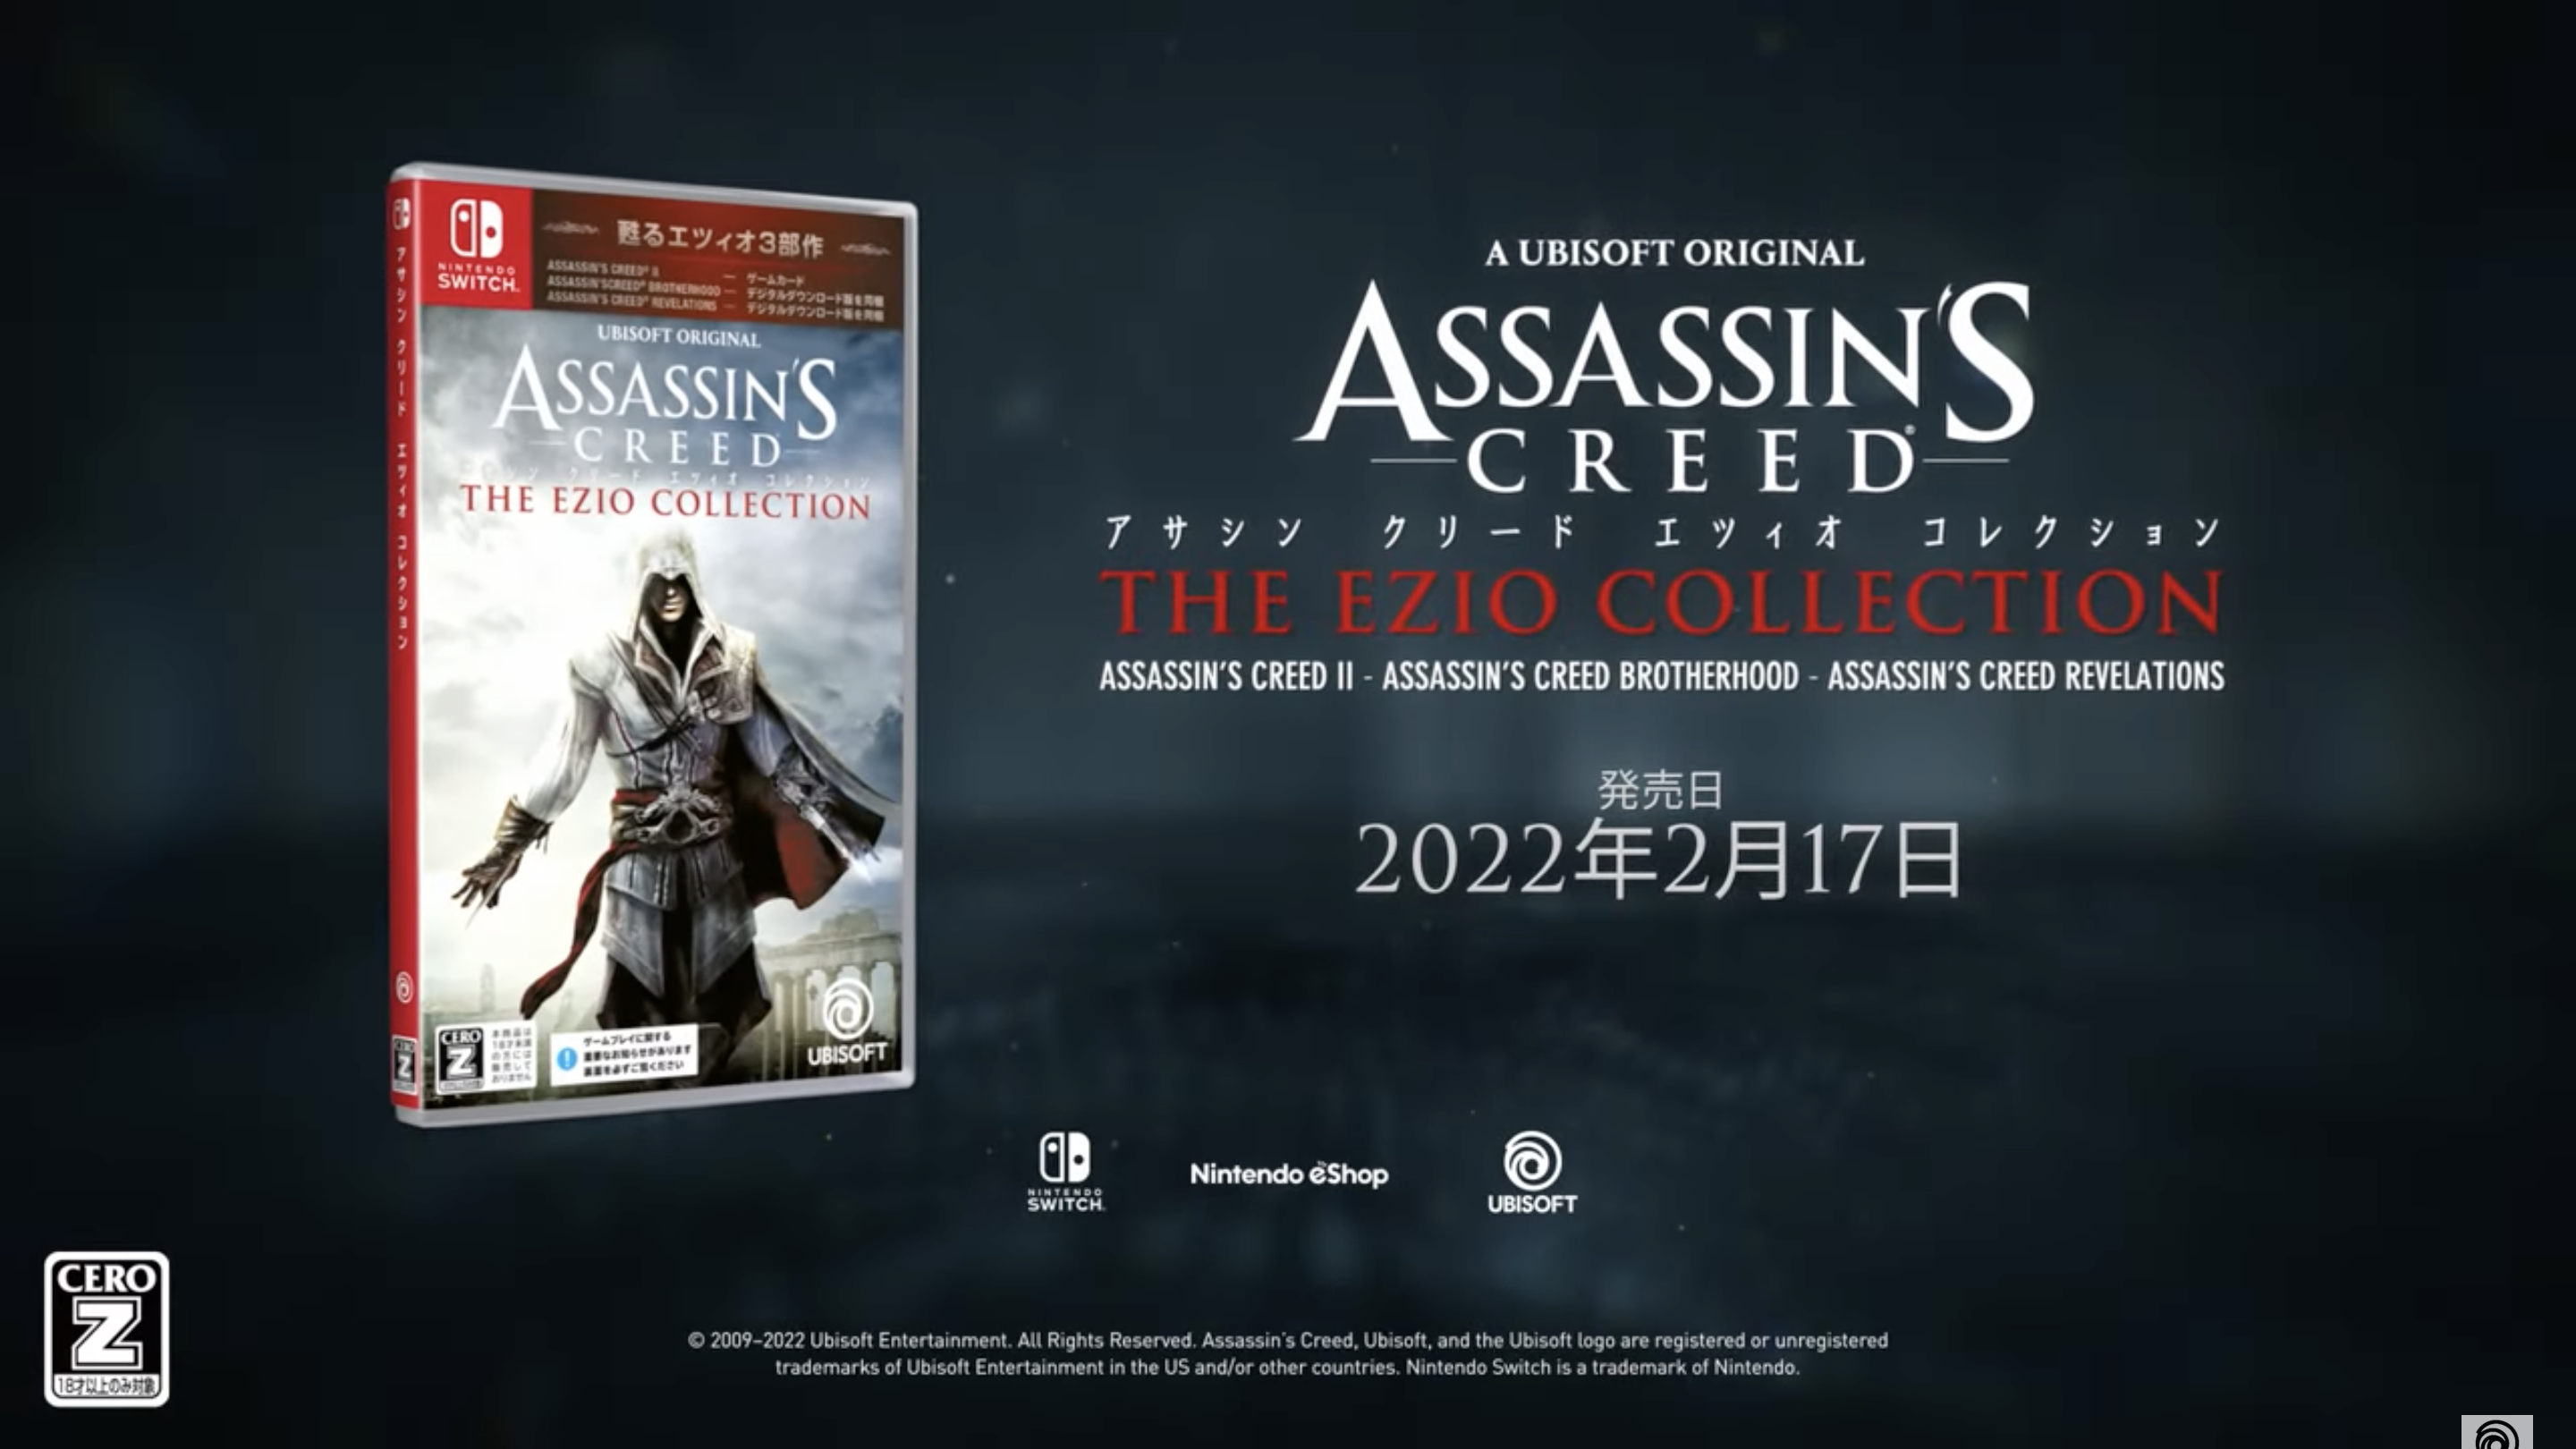 Assassin’s Creed Ezio Collection Confirmed for Switch in Japan